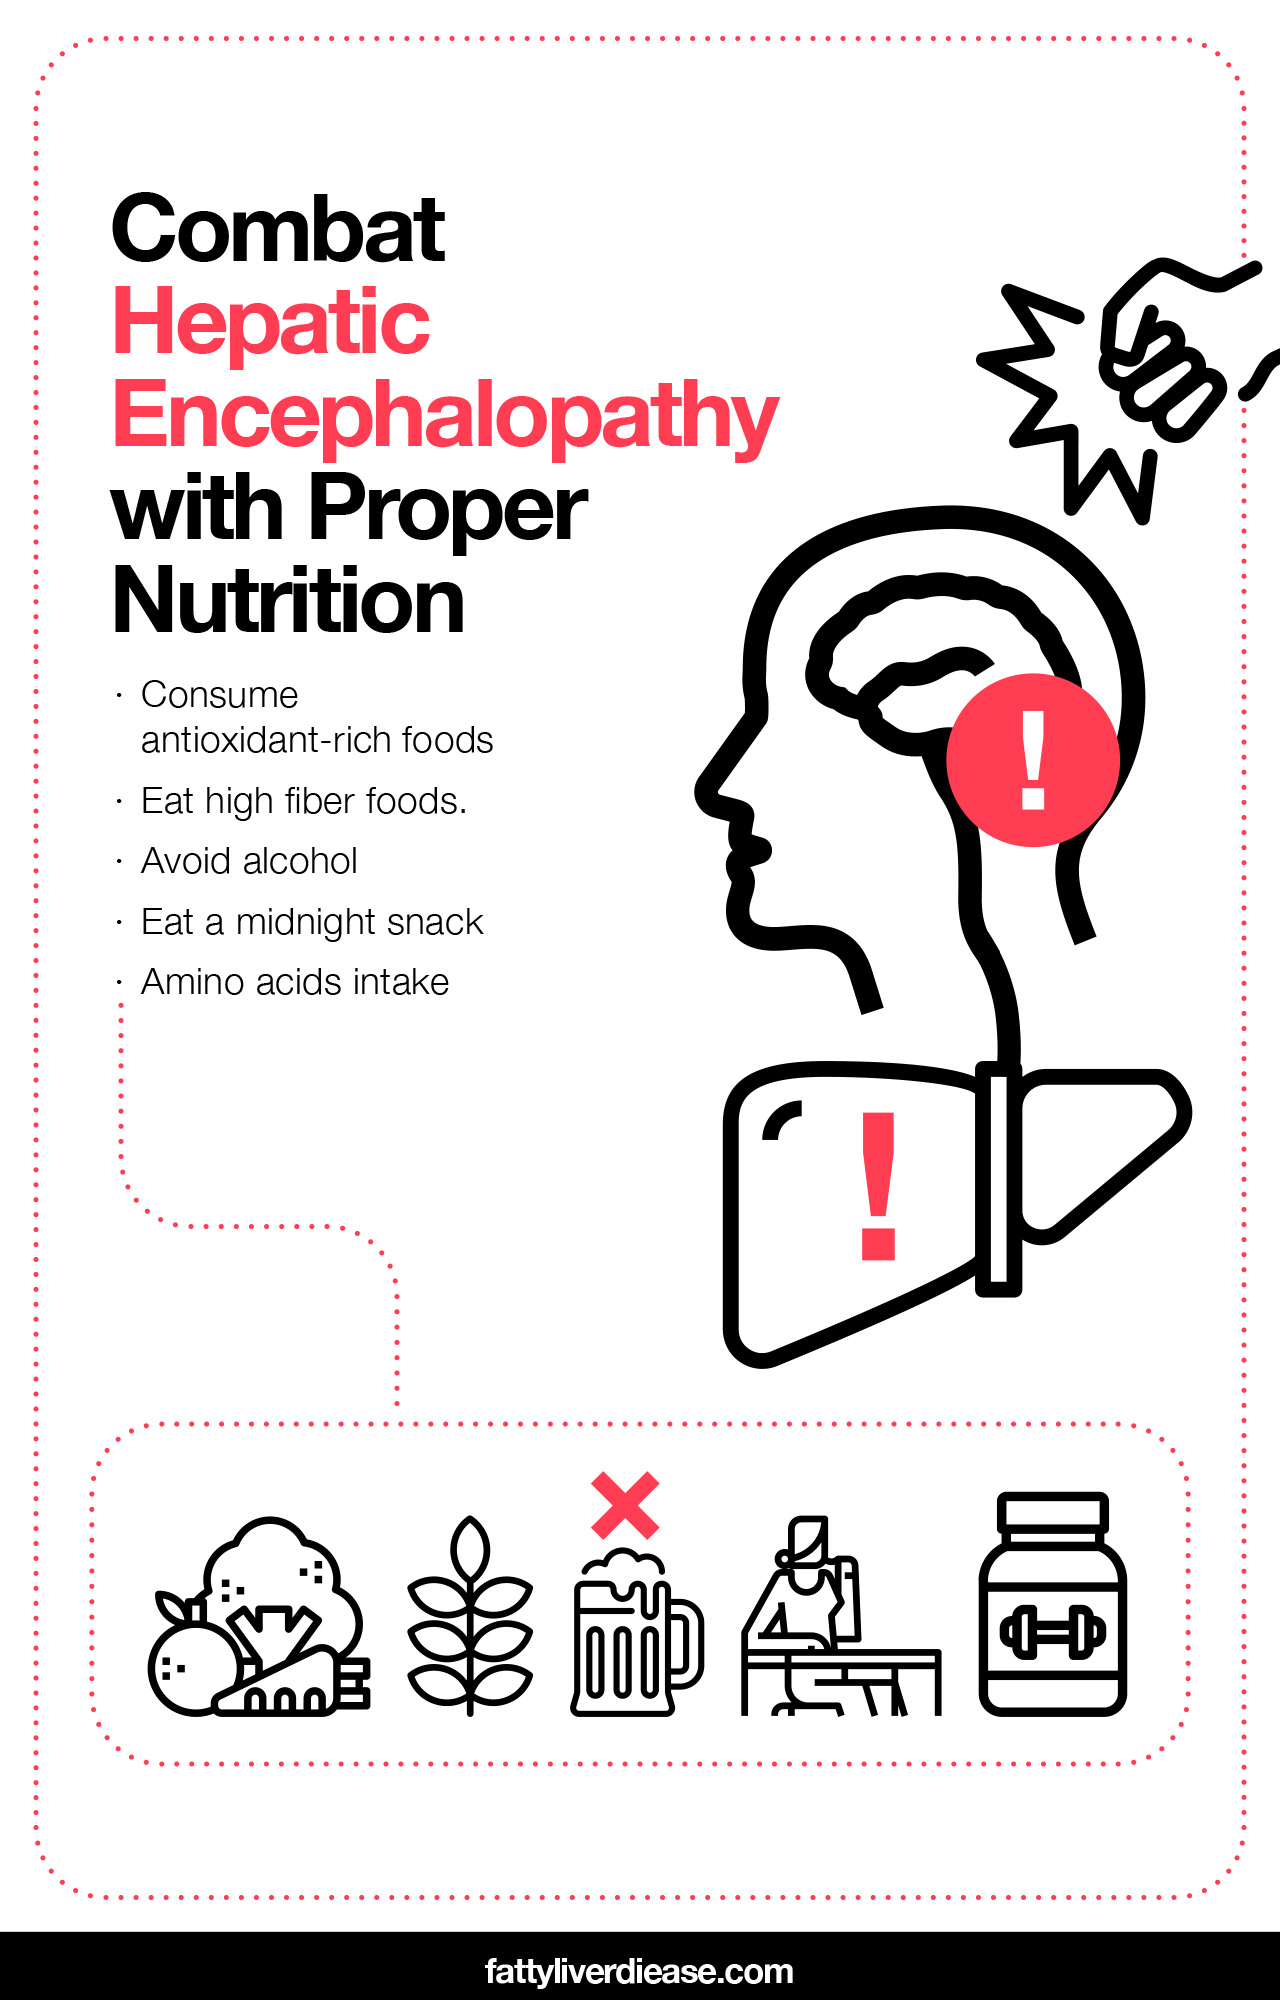 Combat Hepatic Encephalopathy with Proper Nutrition